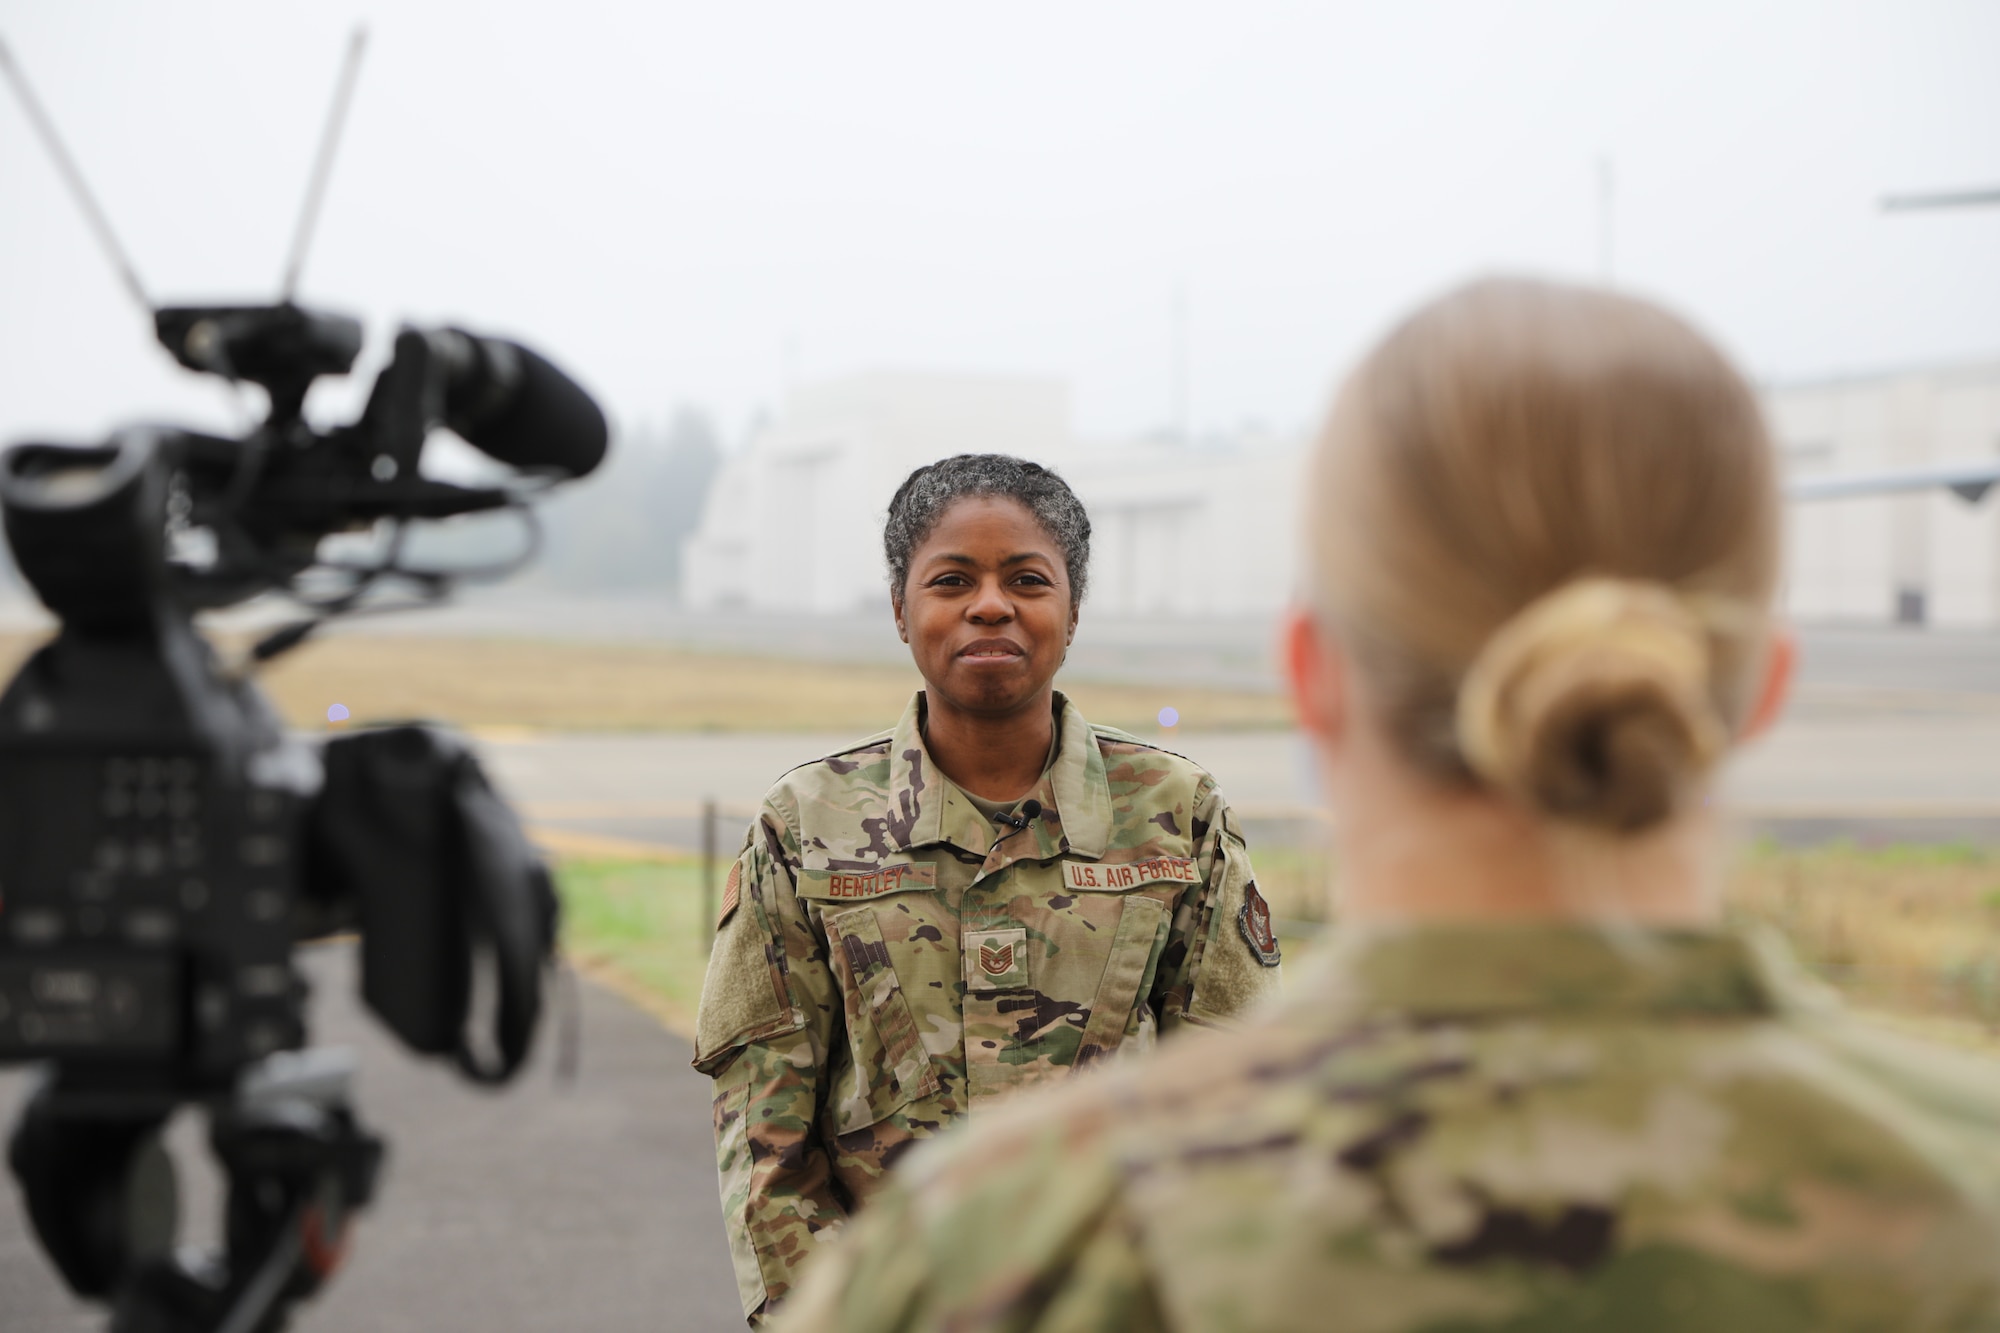 A Reserve Citizen Airman films a thank you video to her civilian employer on the flight line.